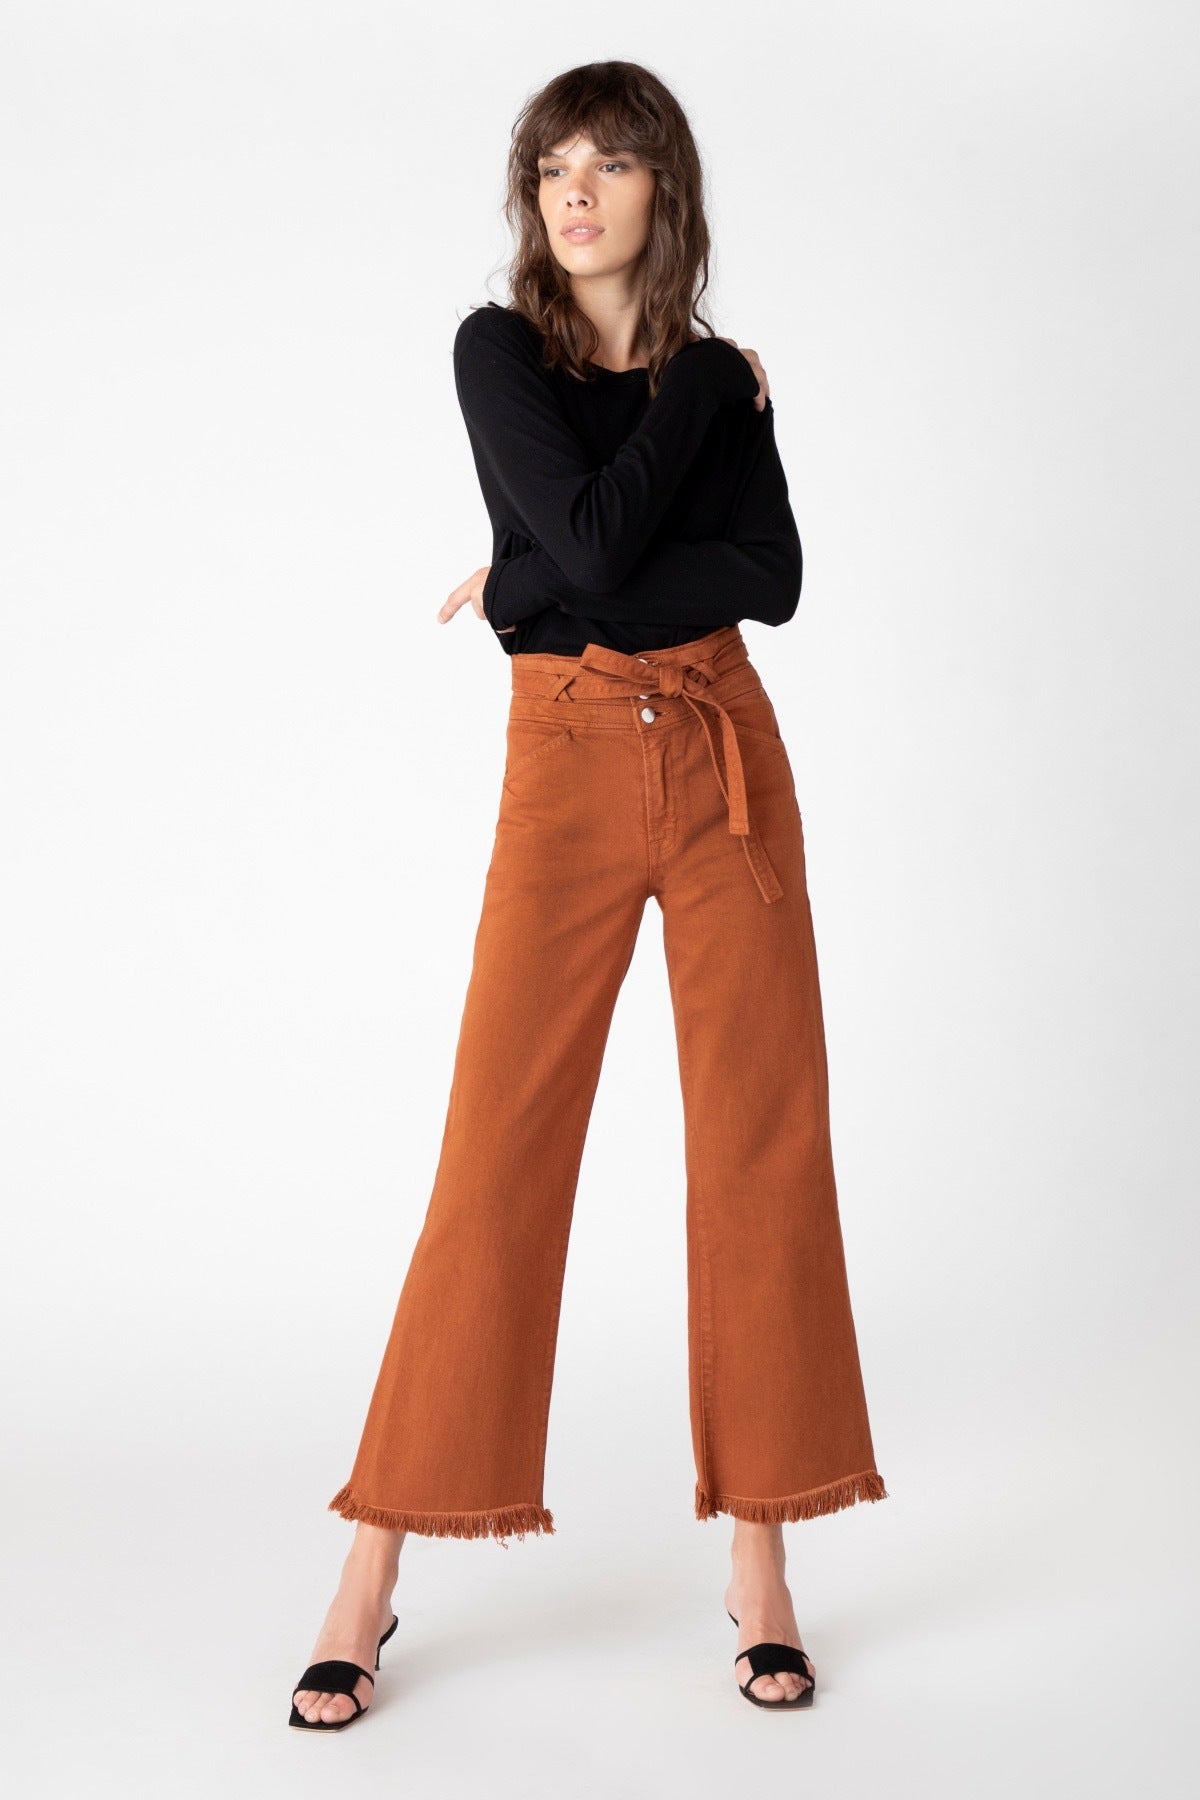 Cropped wide leg trousers in cotton/linen, length 24.5